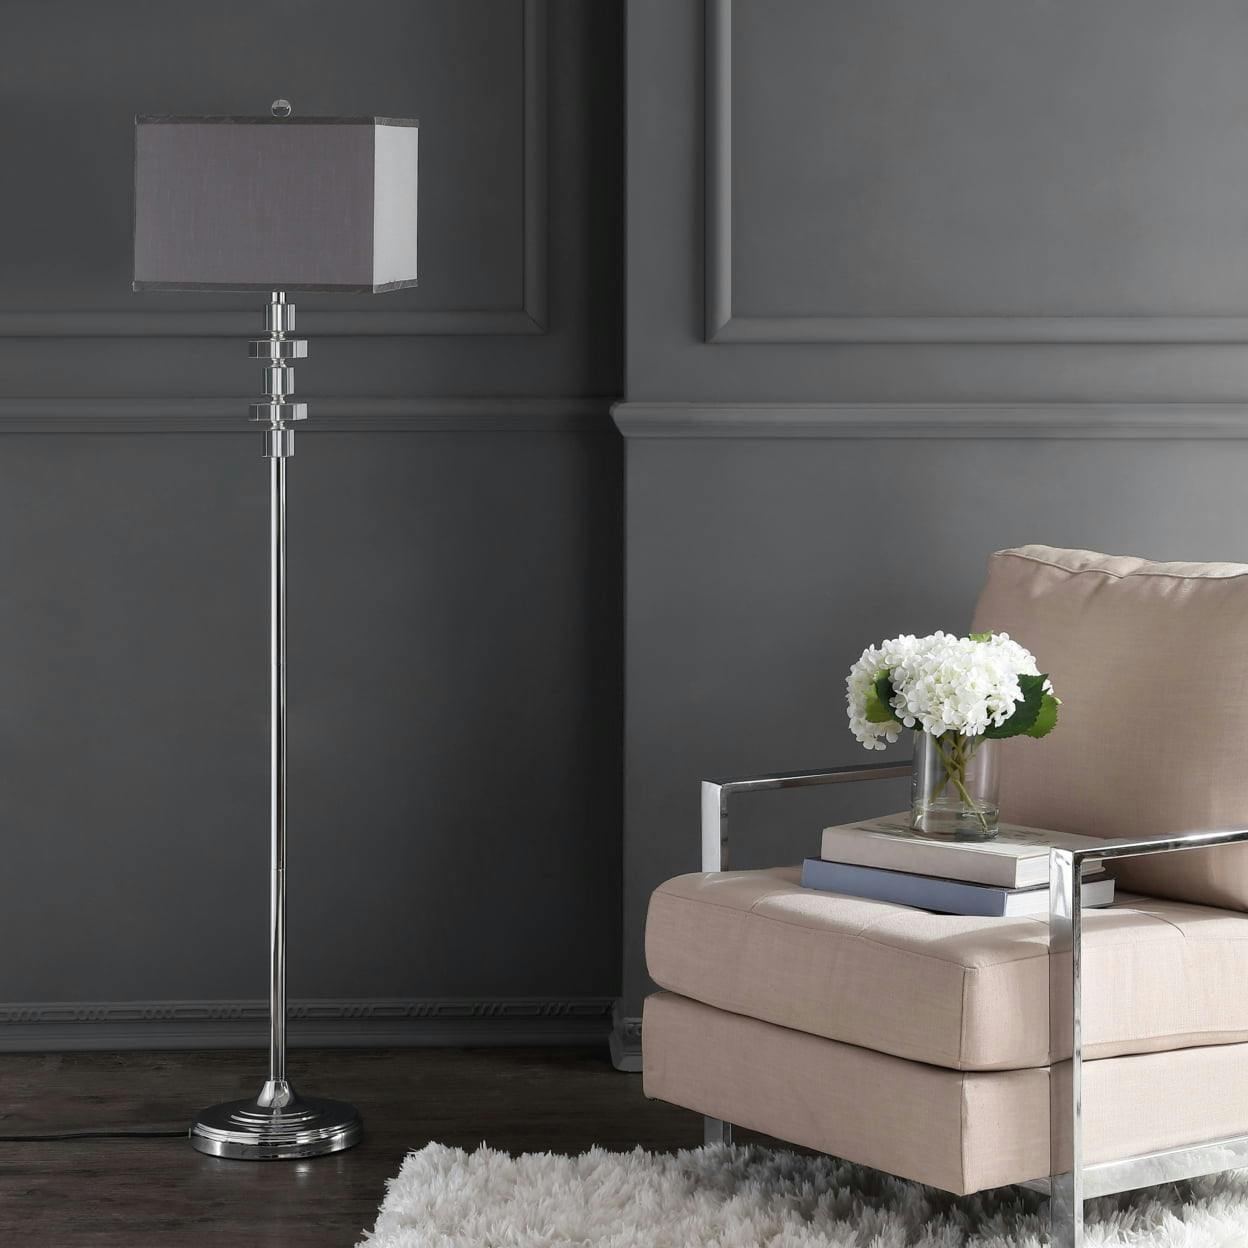 Elegant Times Square 60-inch Chrome and Crystal Floor Lamp